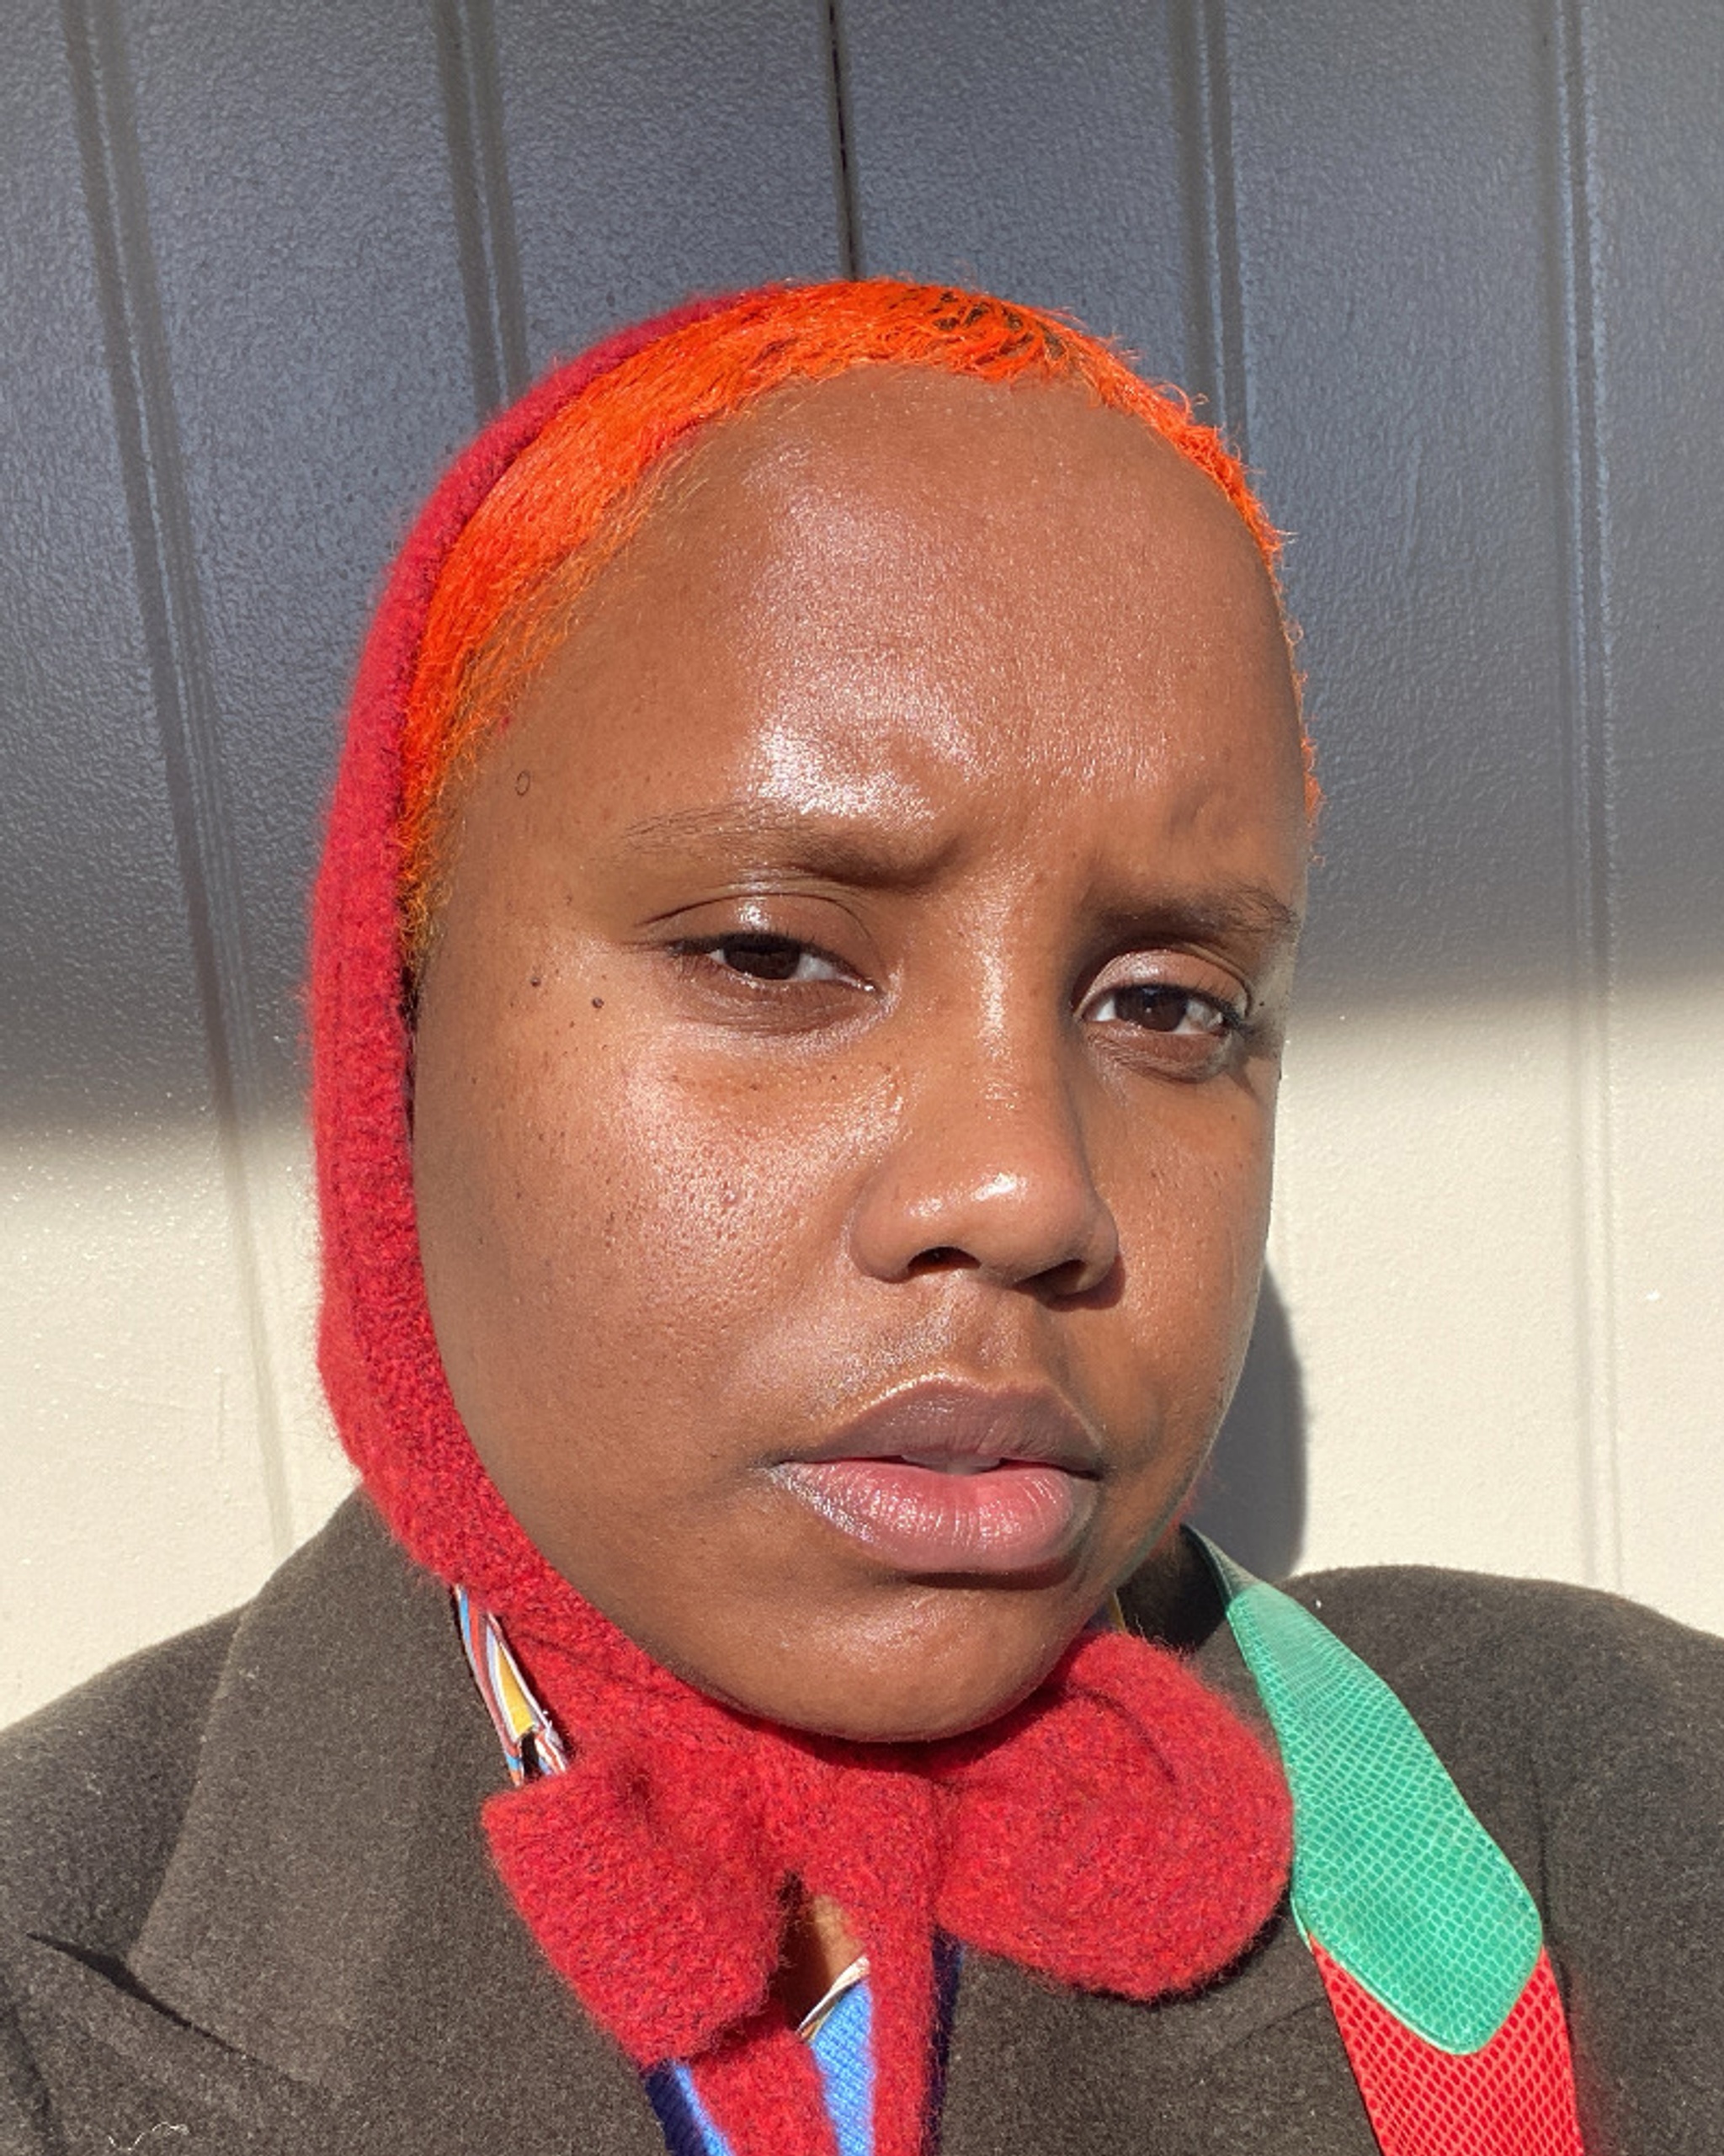 A portrait of Shala Miller, a Black nonbinary singer who is seen close up as if taking a selfie. Shala has a quizzical or skeptical expression. Their short hair is a bright orange and they wear a bright red scarf over their head, tied under their chin. 